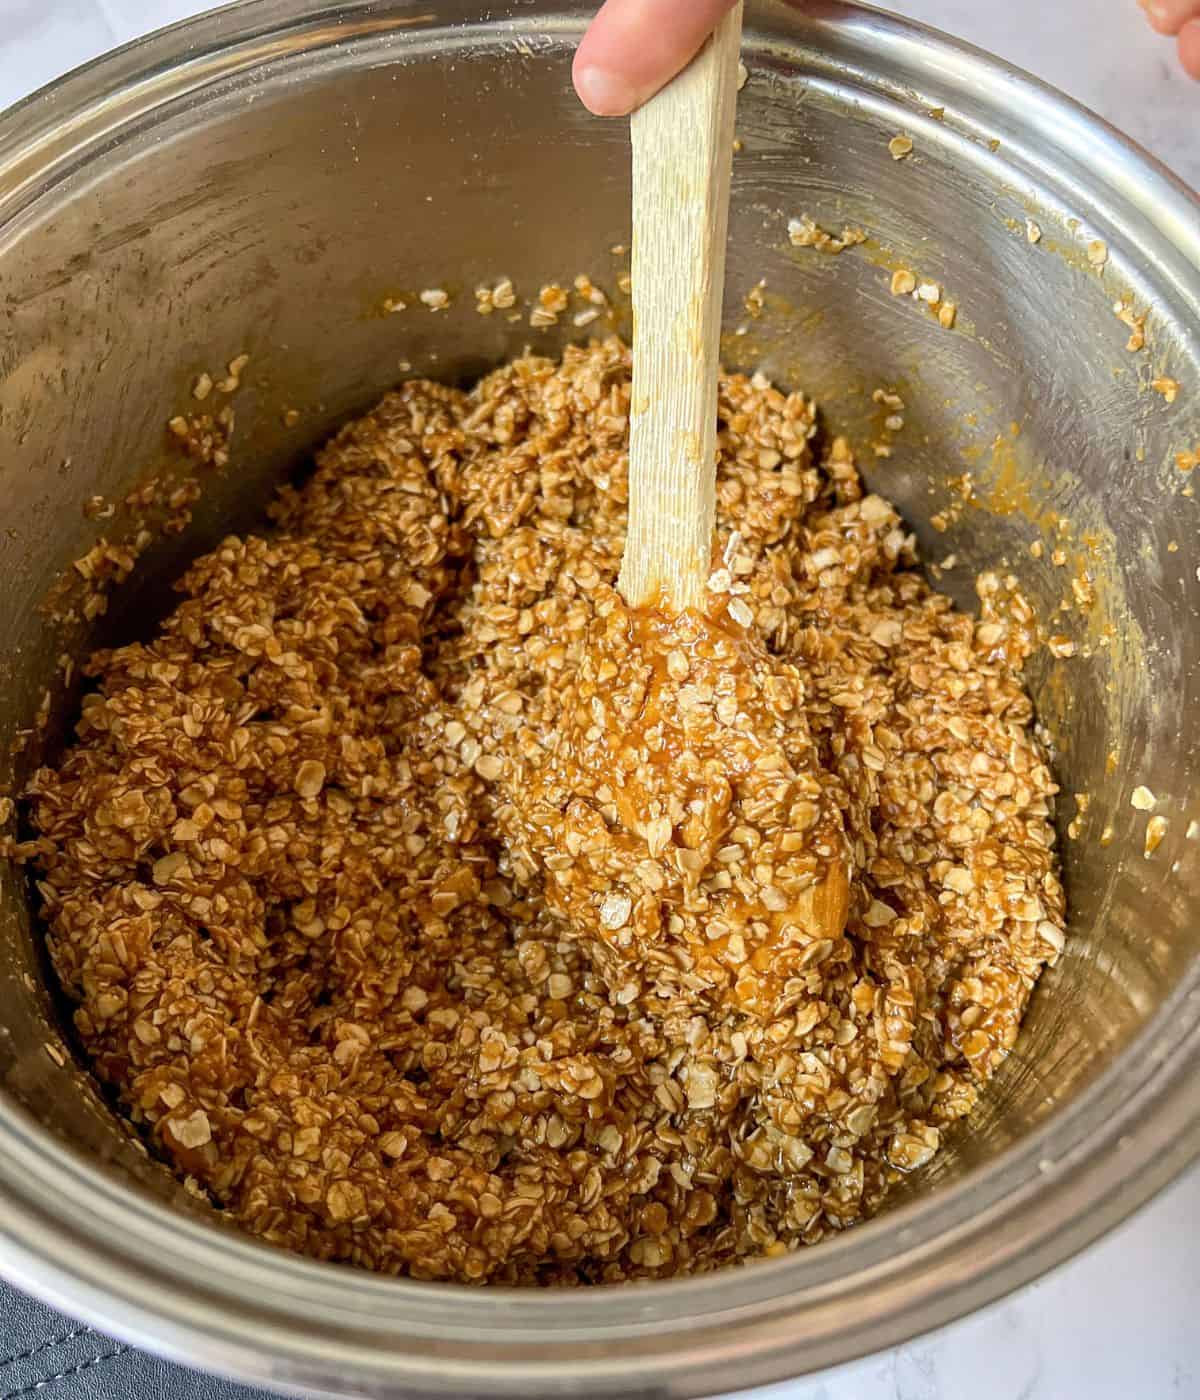 Flapjack mixture being stirred in a saucepan.